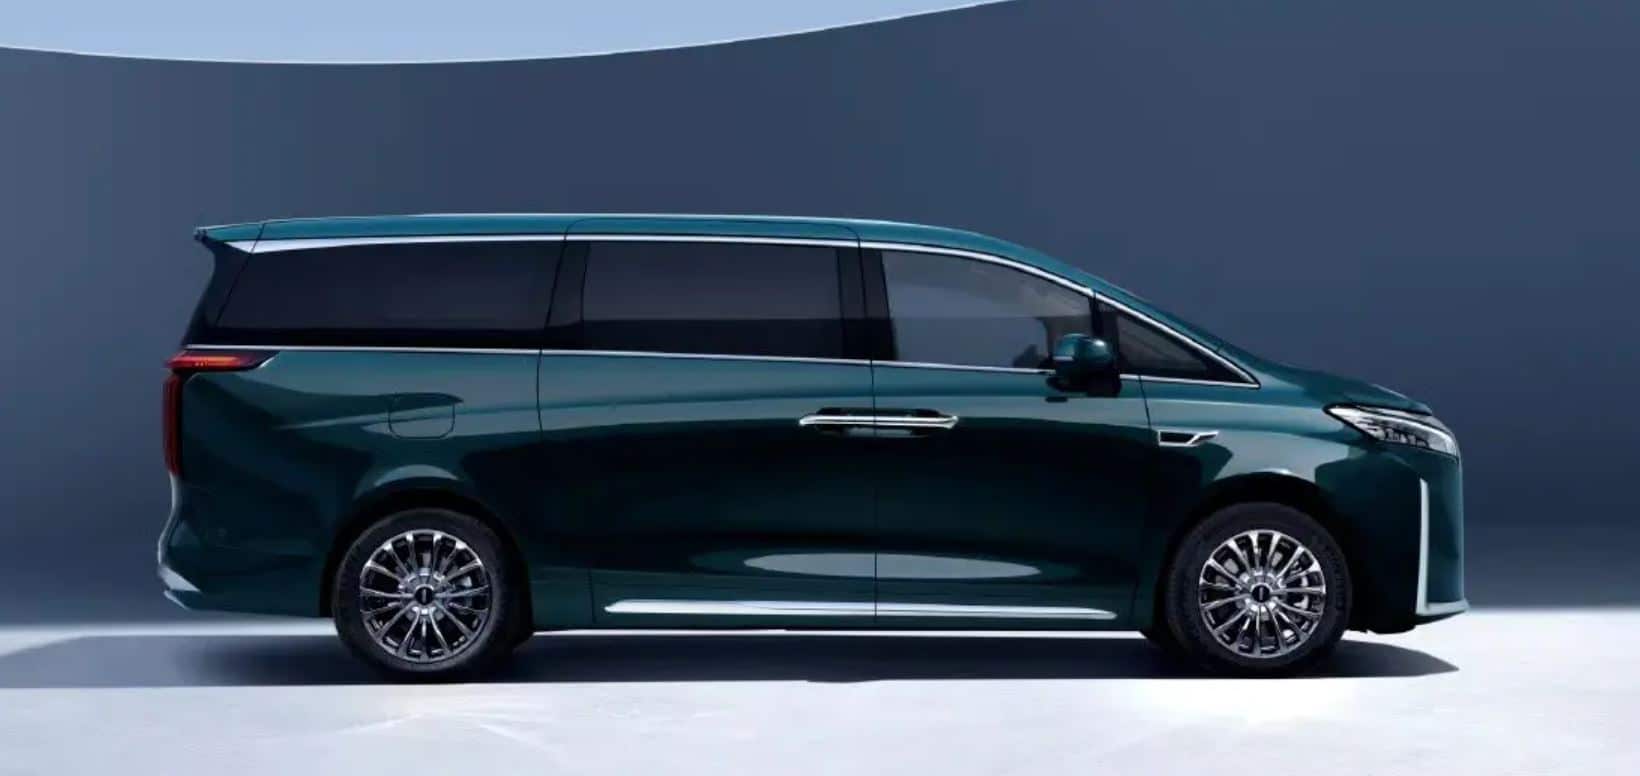 Longest MPV in China? GWM’s Wey Gaoshan has a new edition over 5.4 meters long